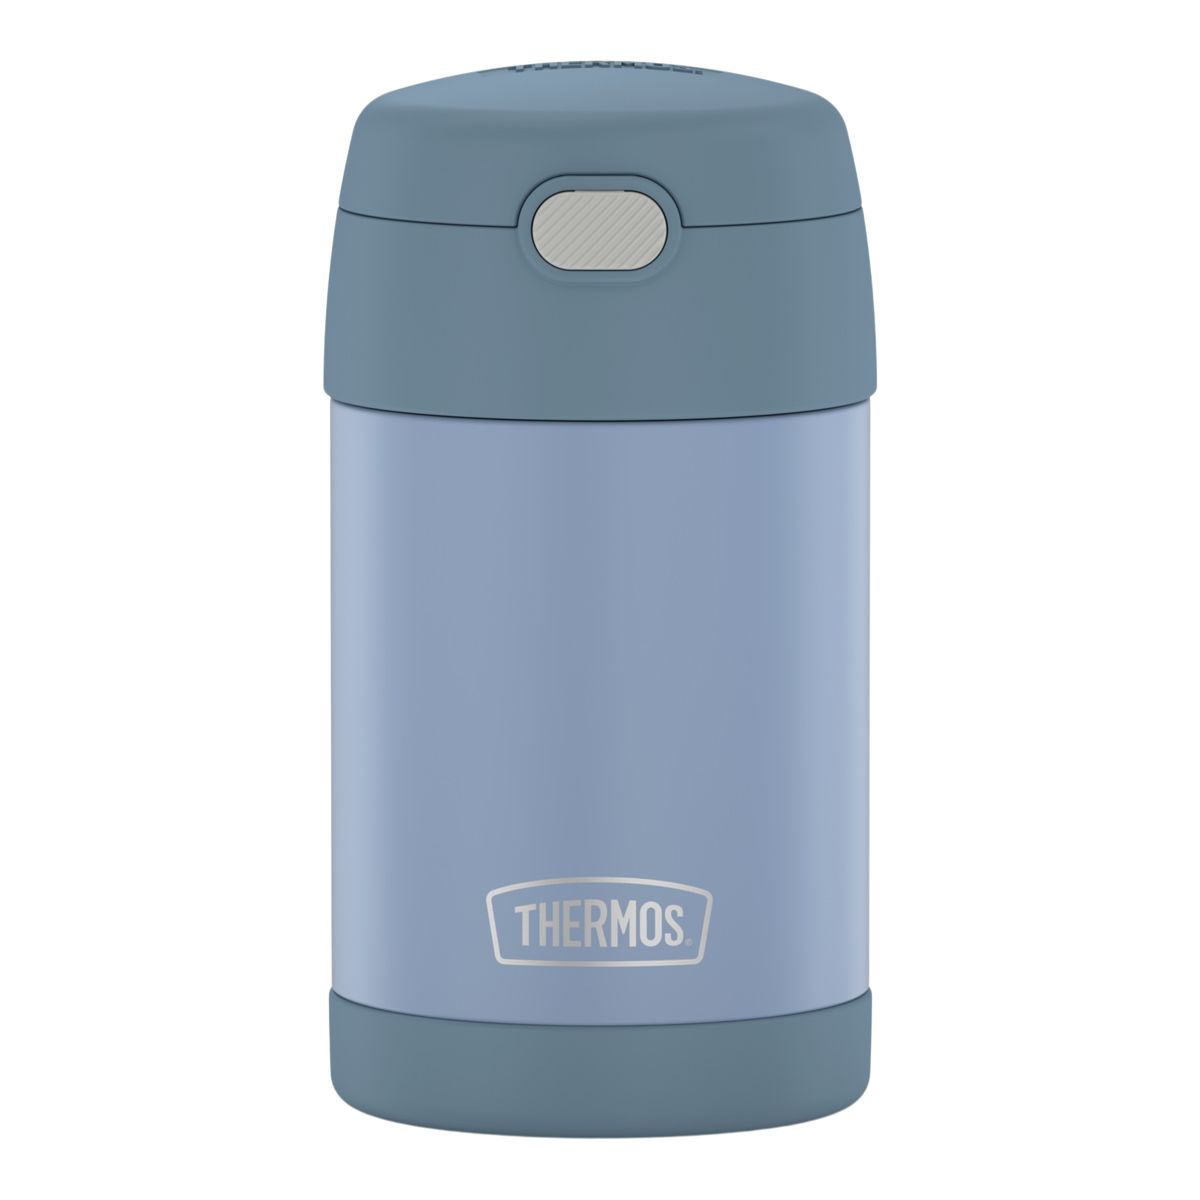 Thermos Funtainer 16 Ounce Stainless Steel Vacuum Insulated Food Jar with Folding Spoon, Denim Blue